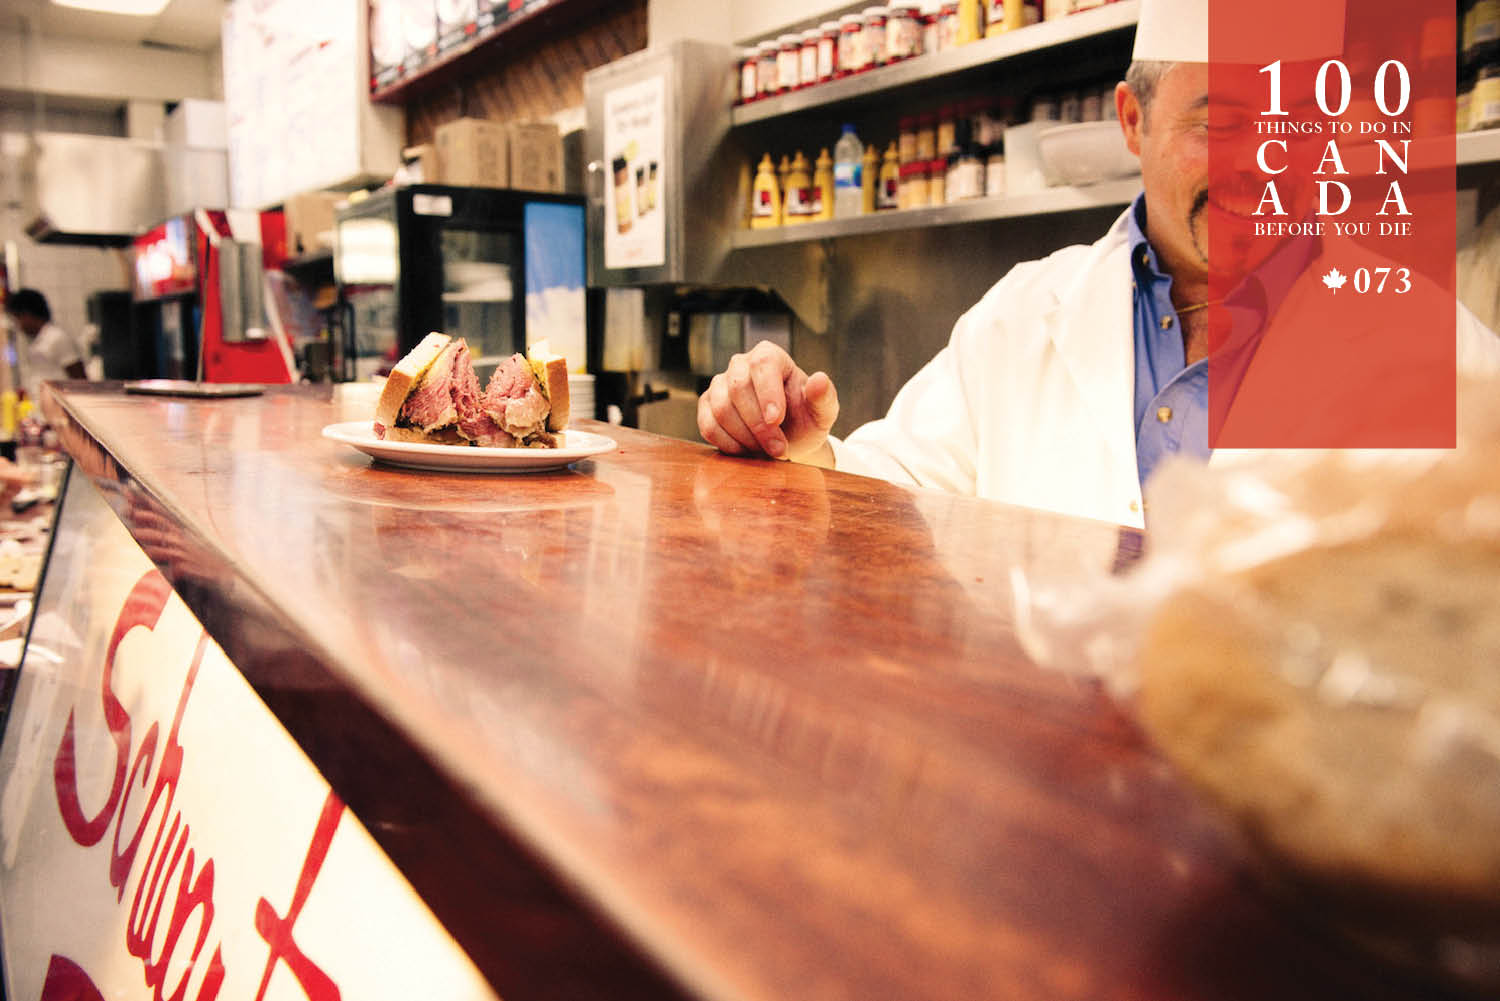 Forget vegemite, feast on a smoked meat sandwich in Montréal